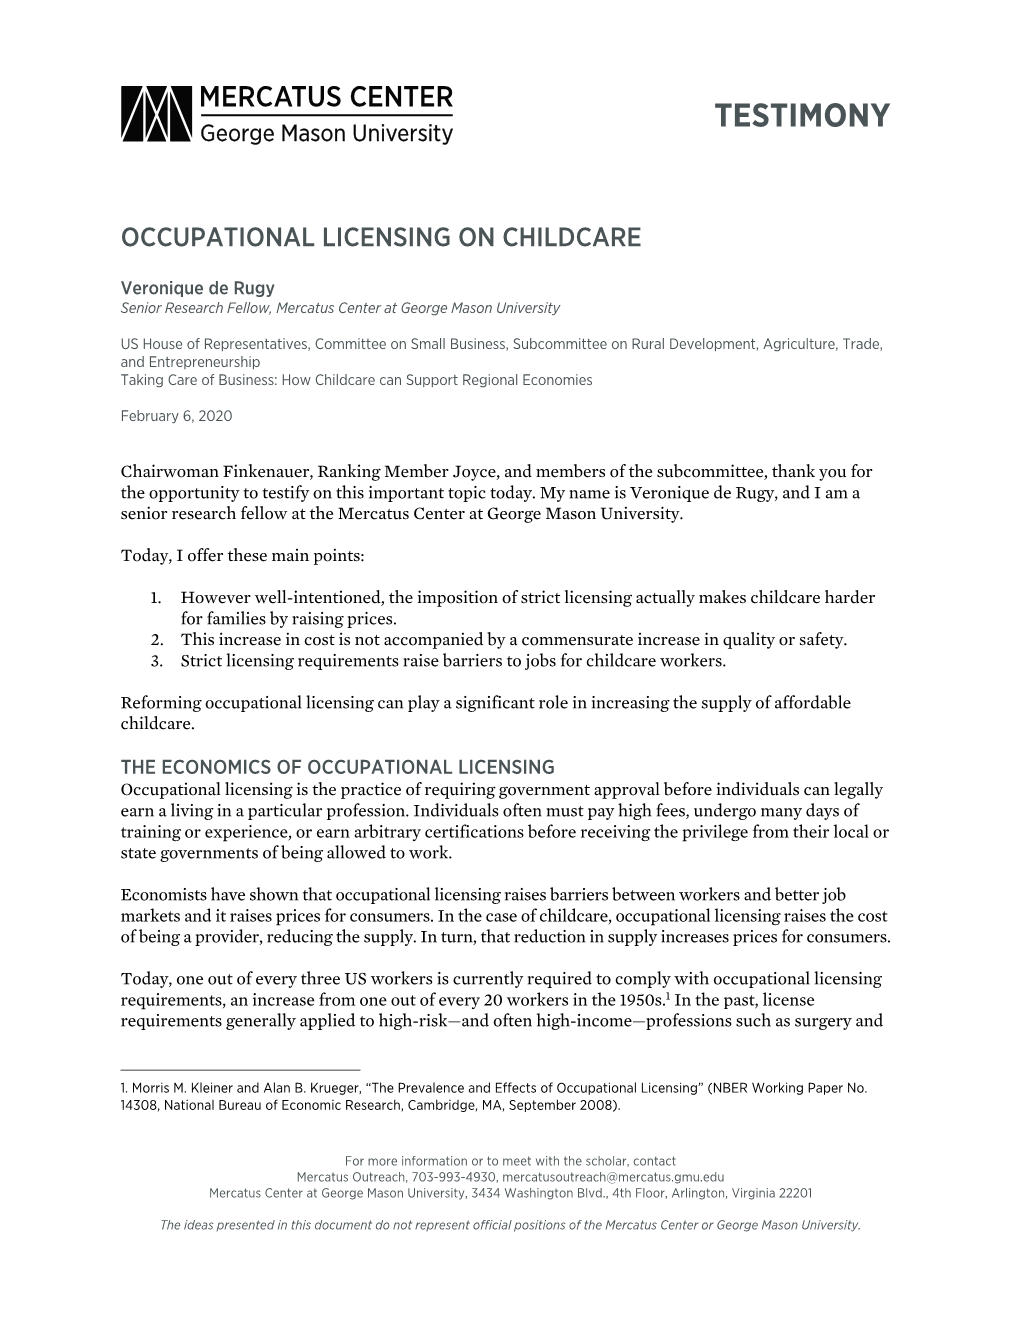 Occupational Licensing on Childcare